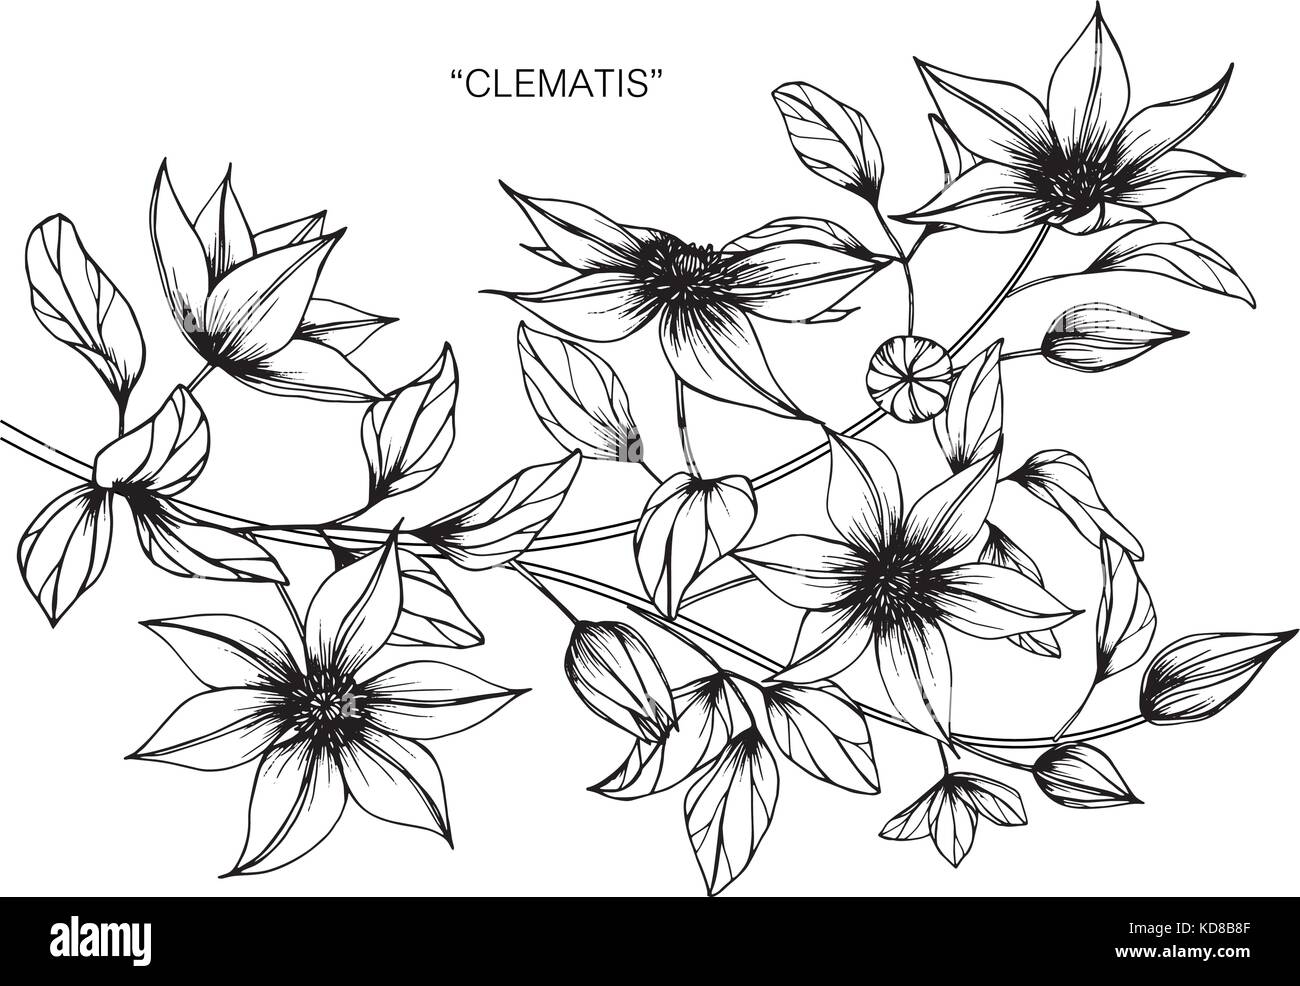 Clematis flower drawing  illustration. Black and white with line art. Stock Vector